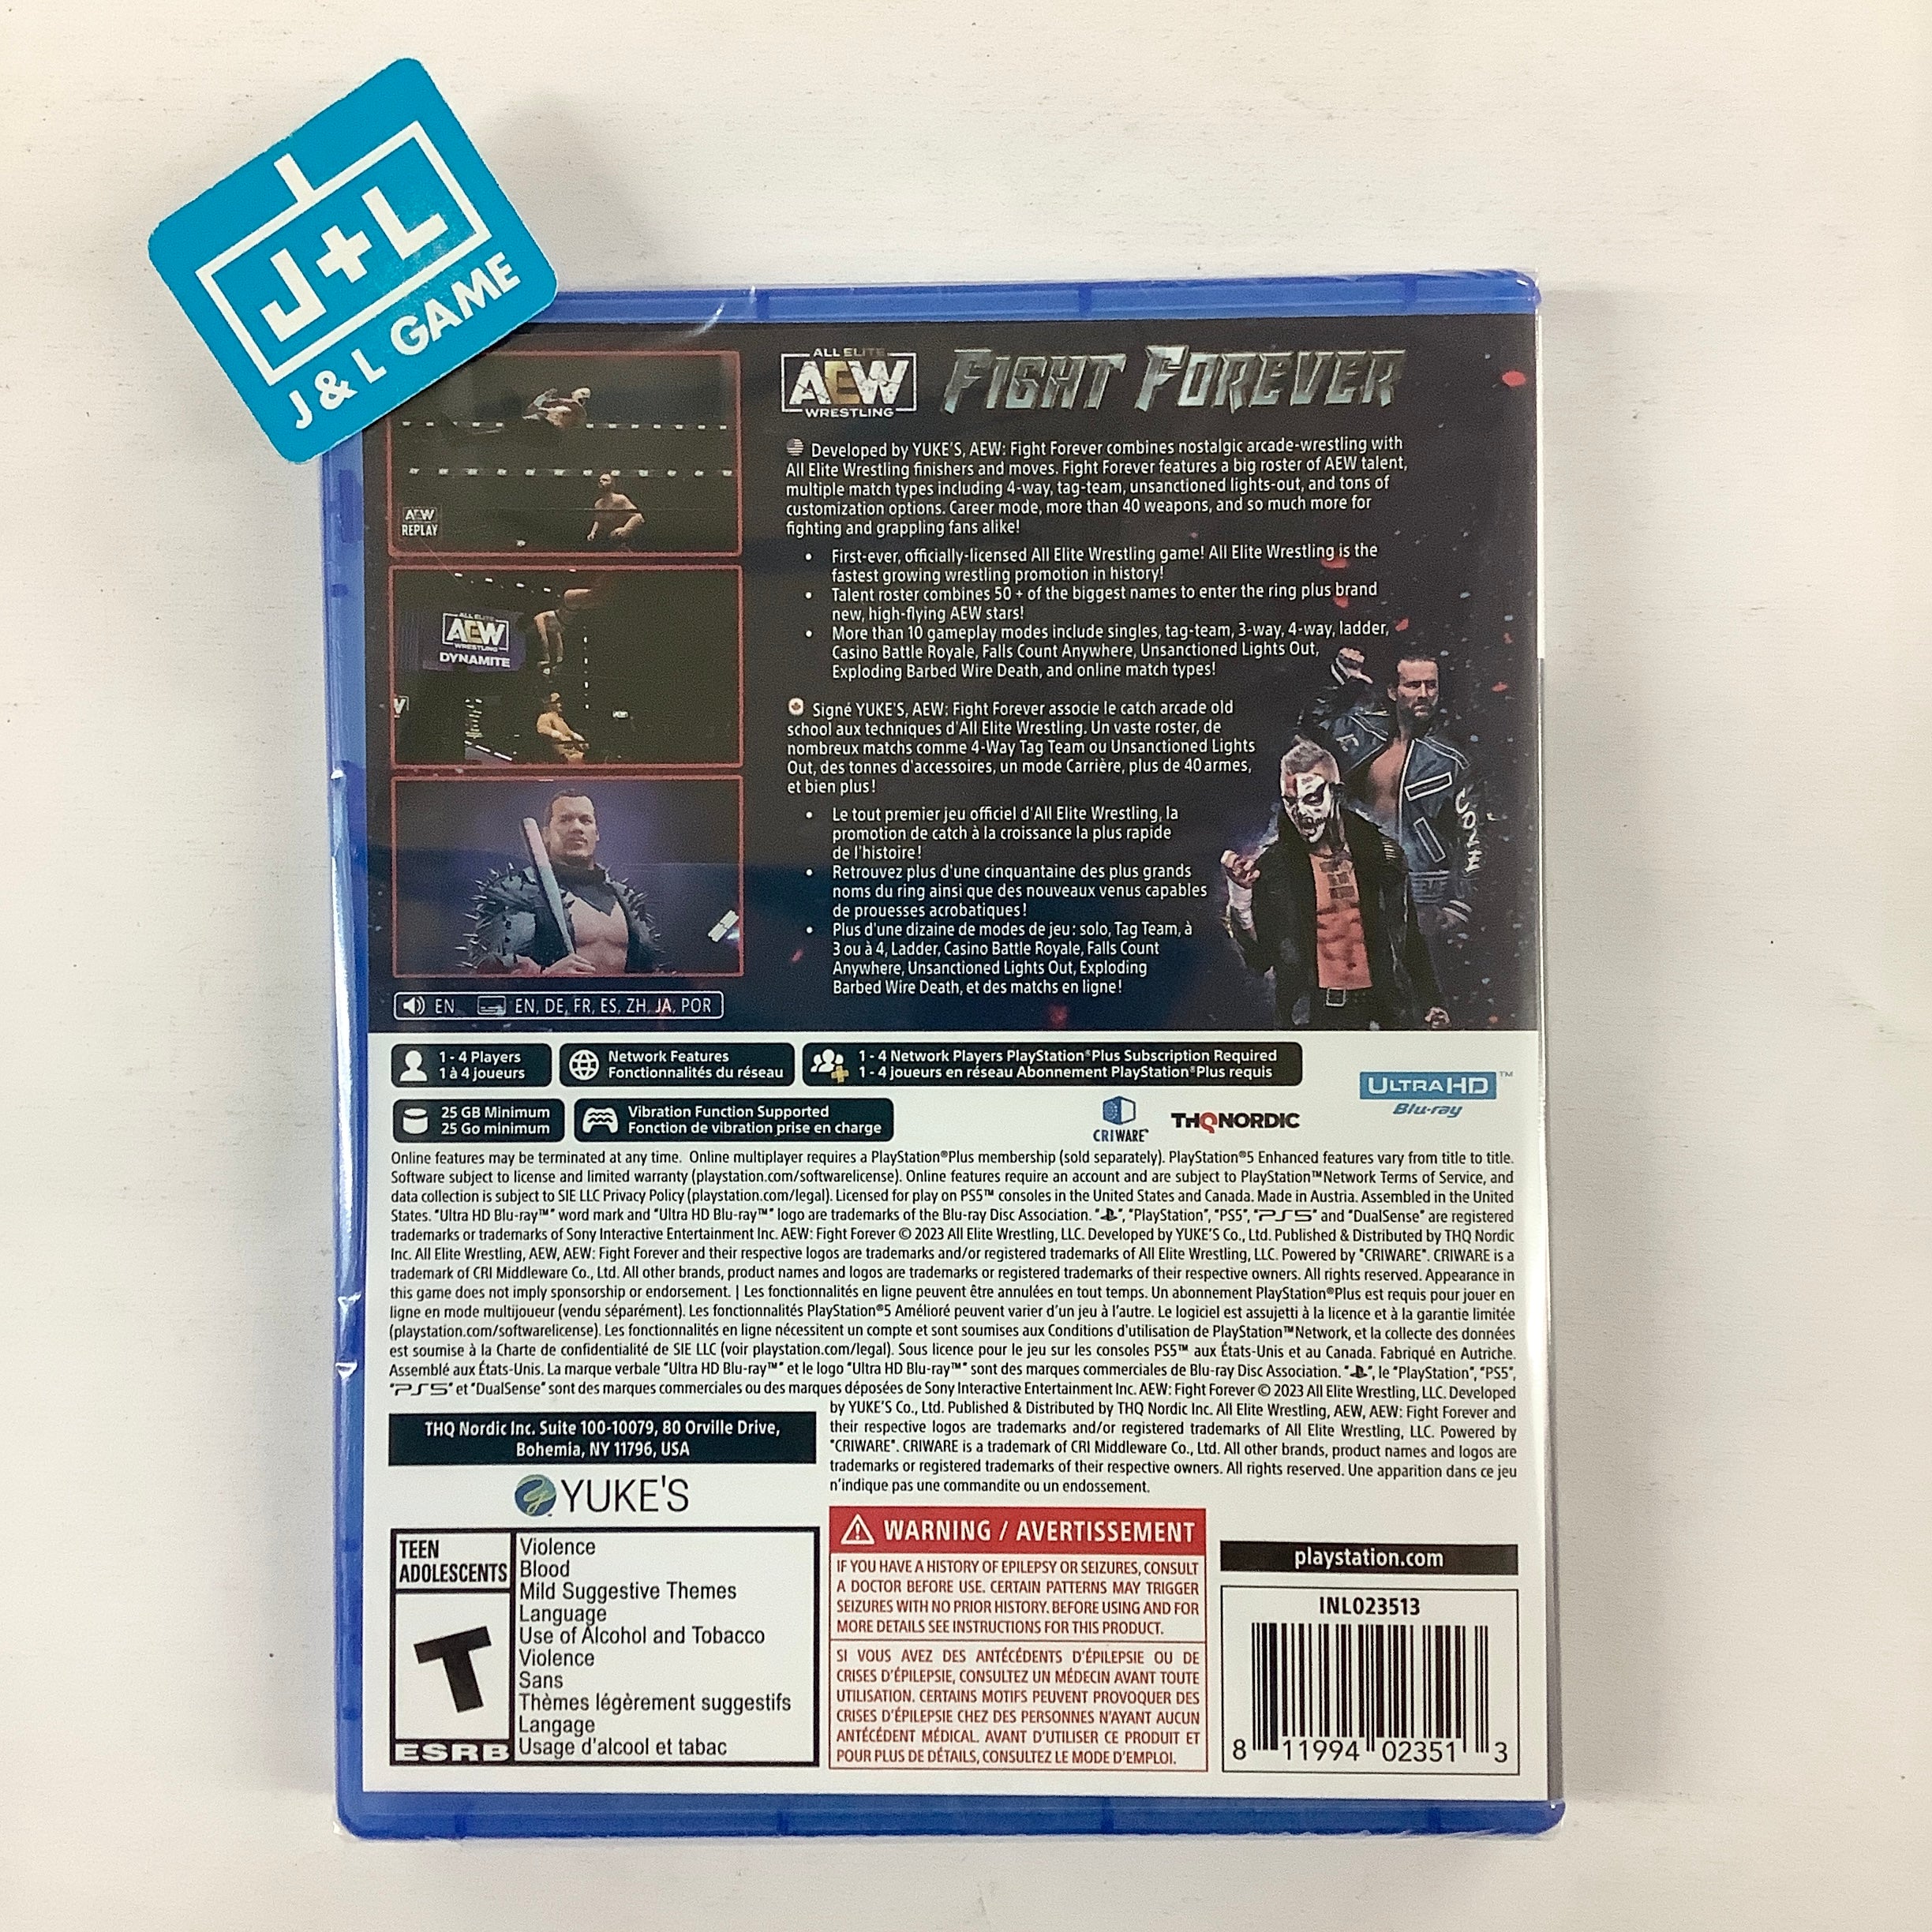 AEW: Fight Forever - (PS5) PlayStation 5 Video Games THQ Nordic   